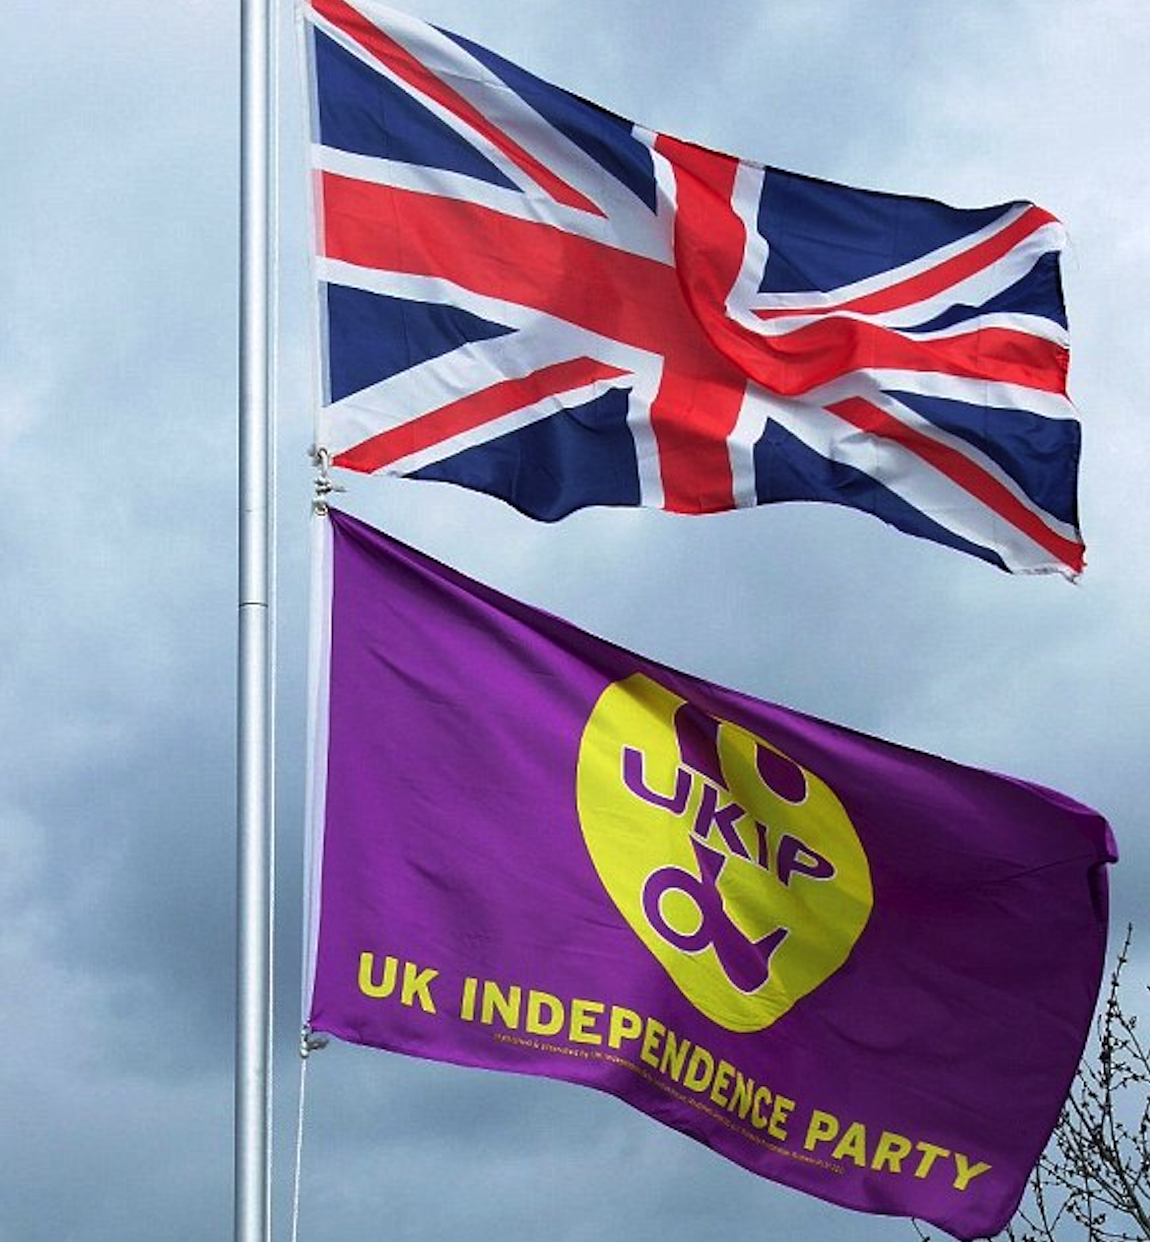 Ukip has received more than 2,000 membership applications in the past two weeks